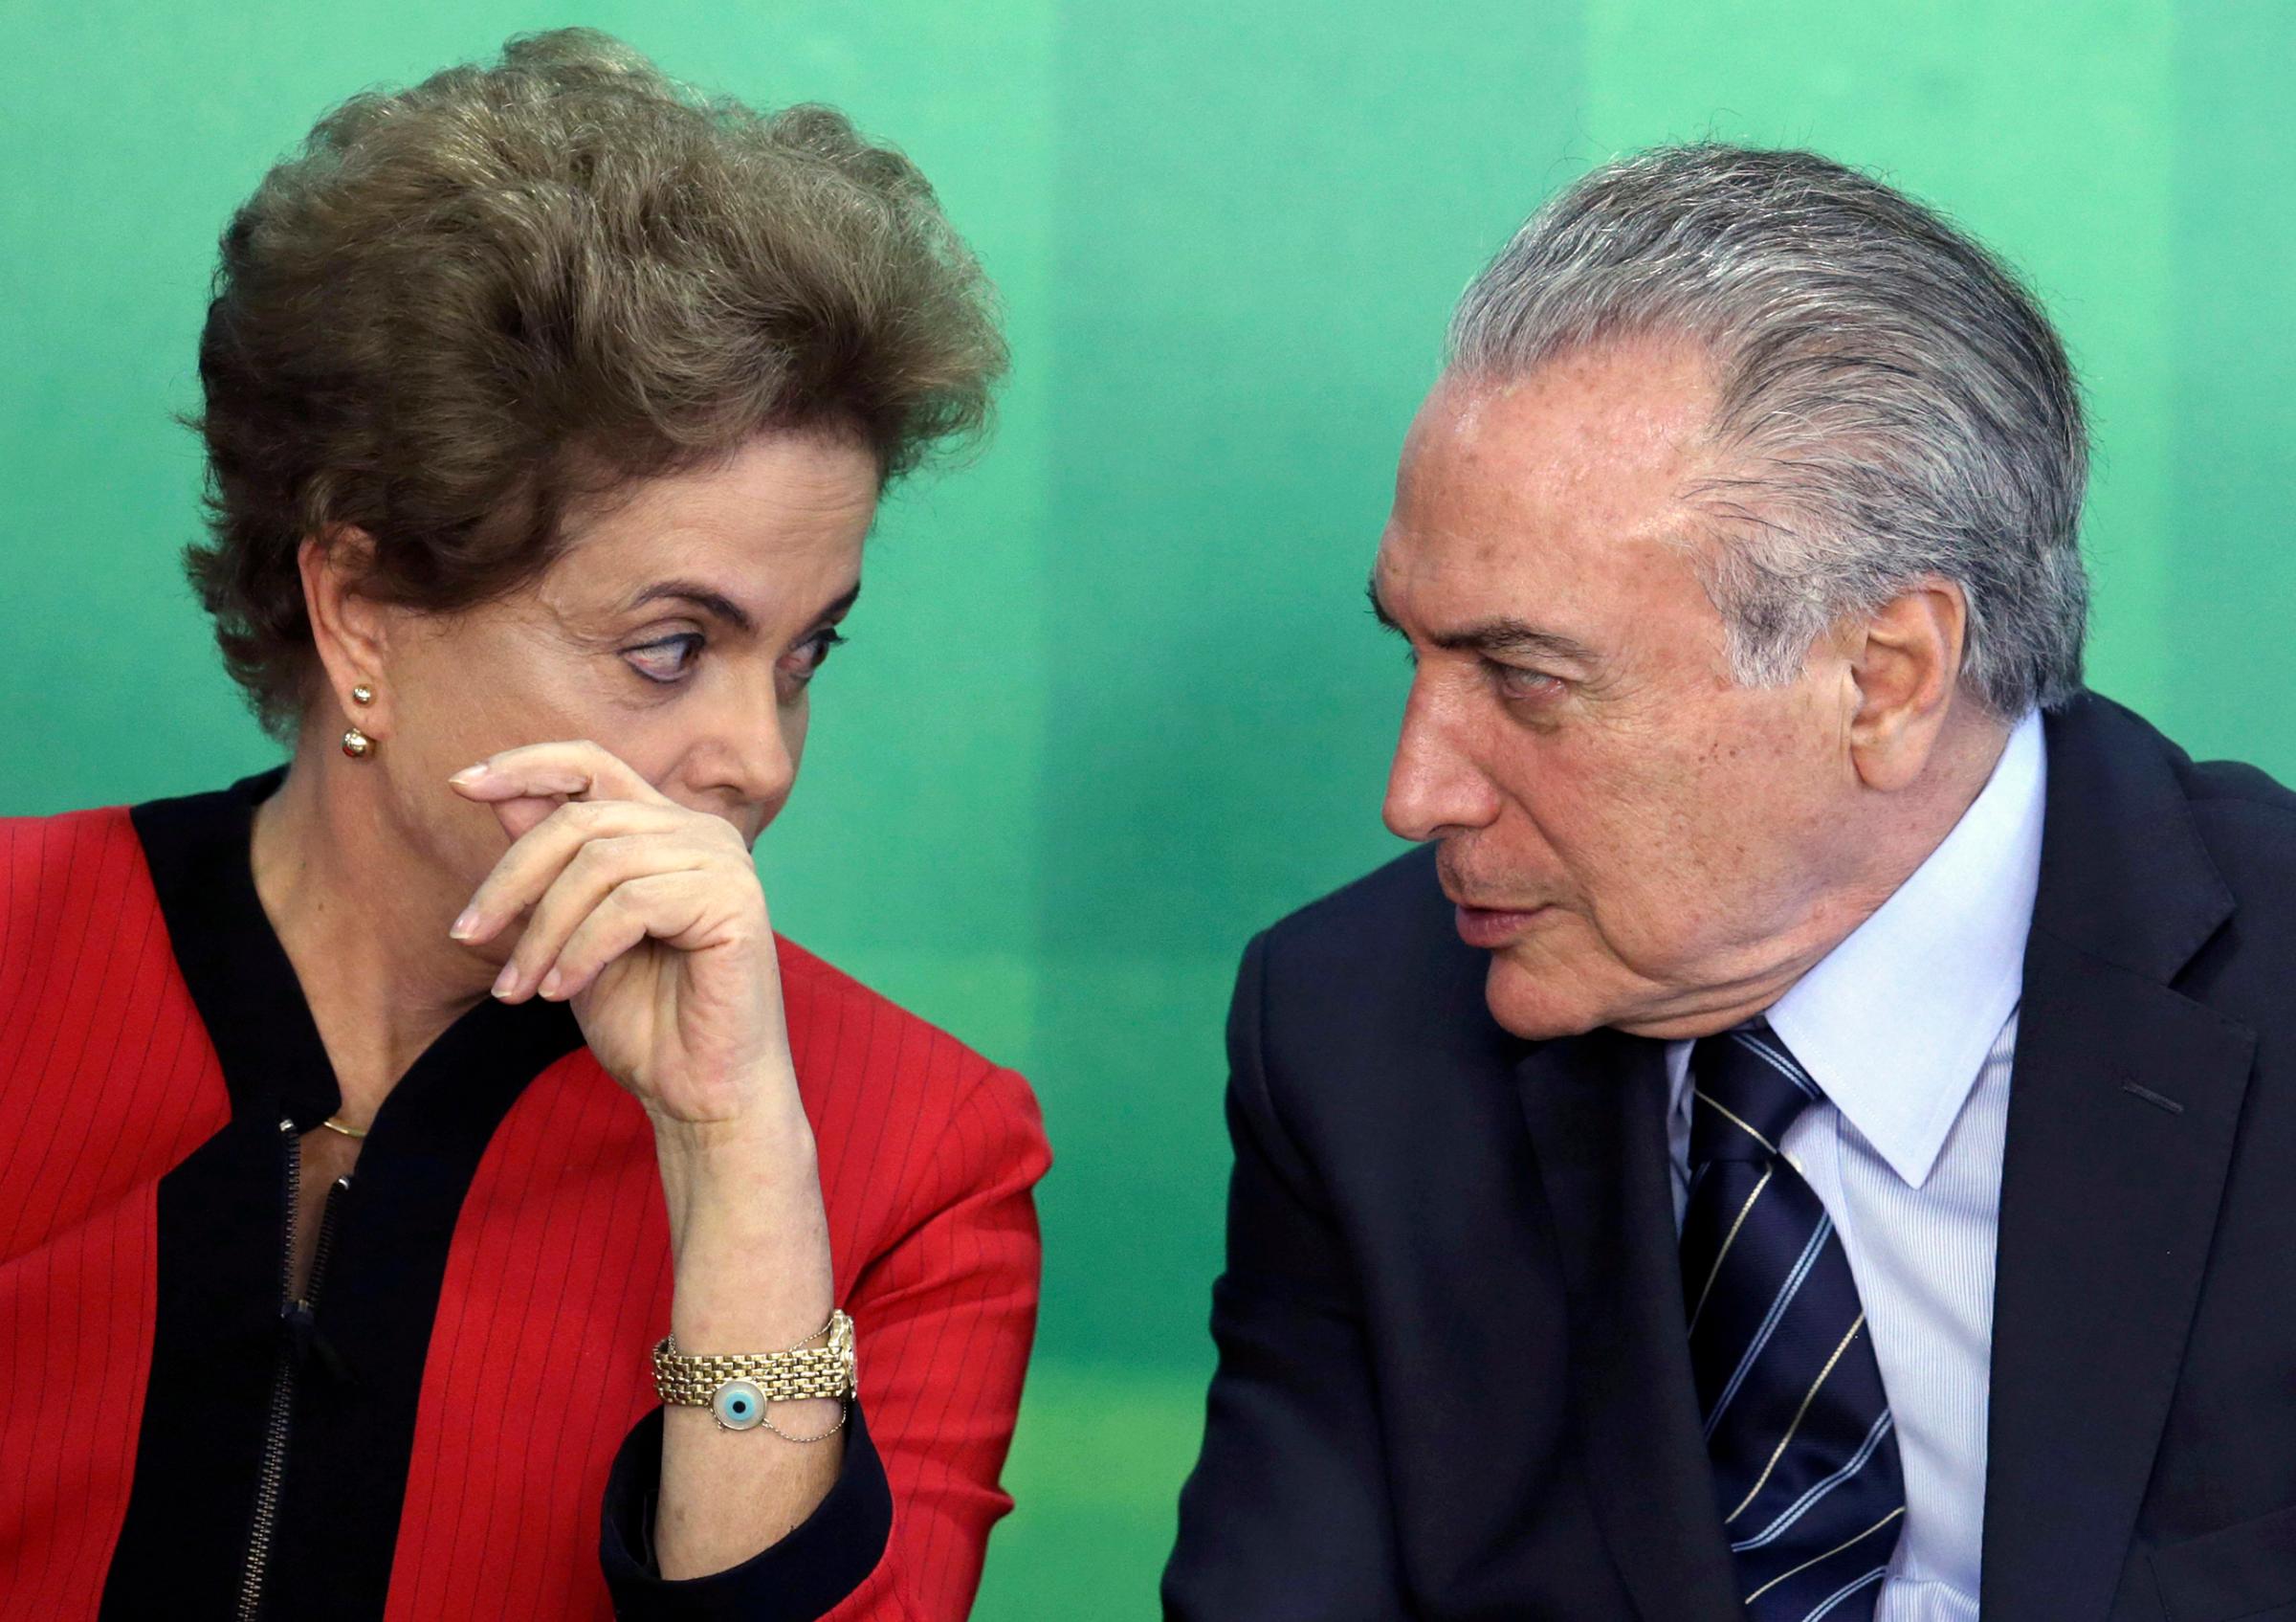 Brazilian President Dilma Rousseff talks with Vice President Michel Temer at Planalto presidential palace in Brasilia, March 2, 2016.